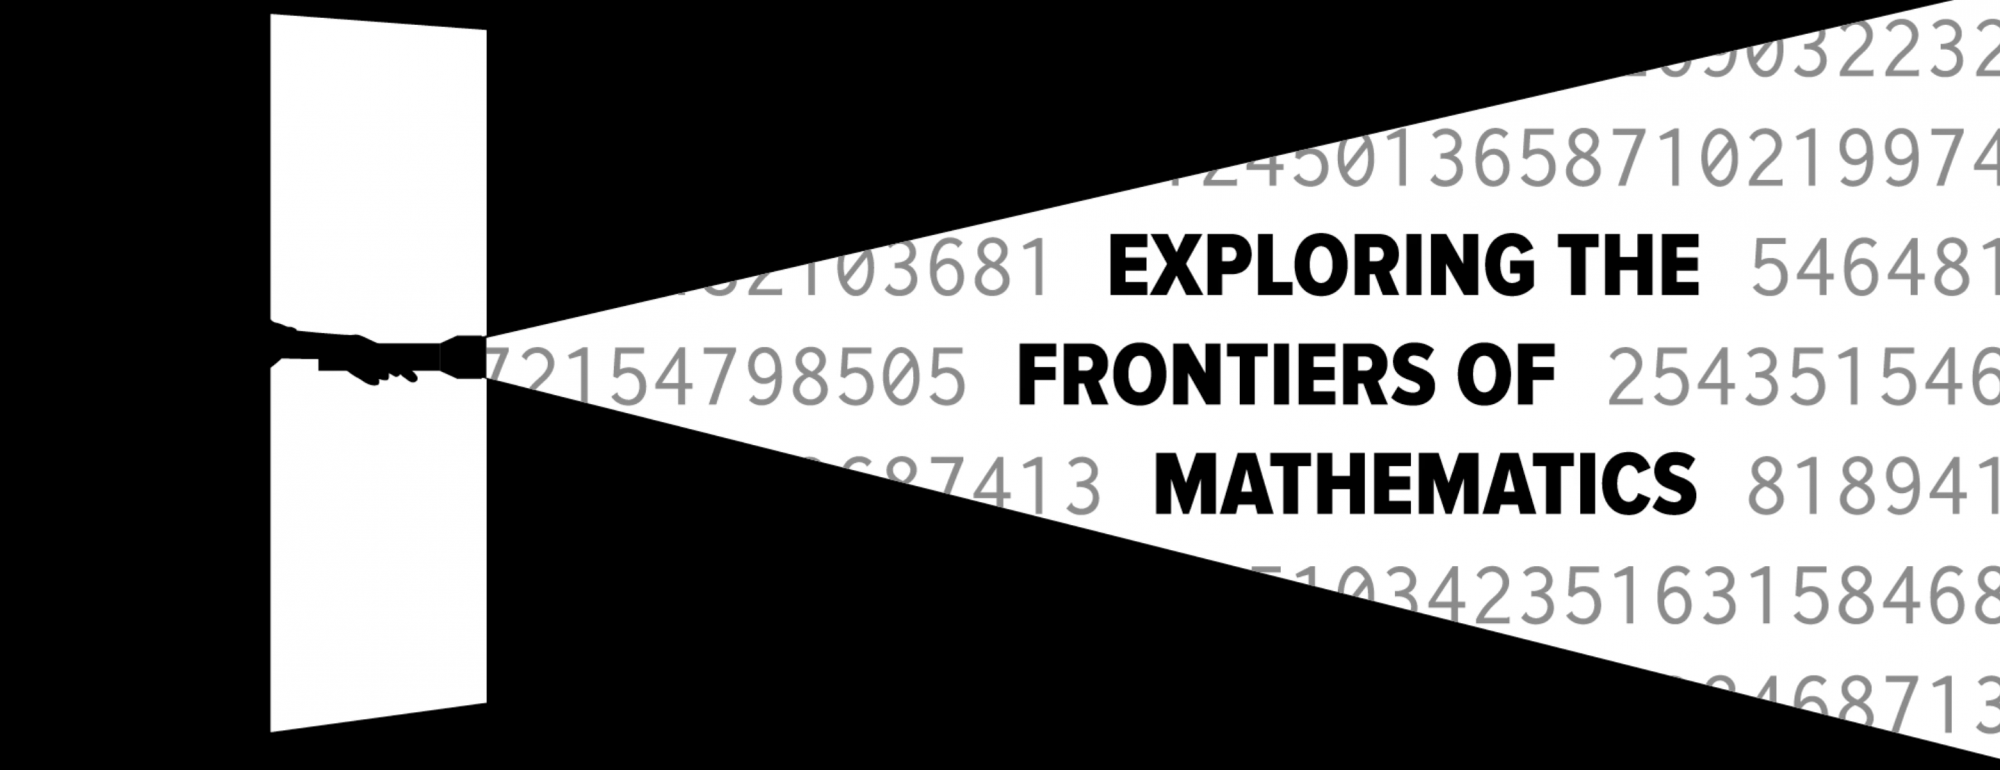 exploring the frontiers of mathematics